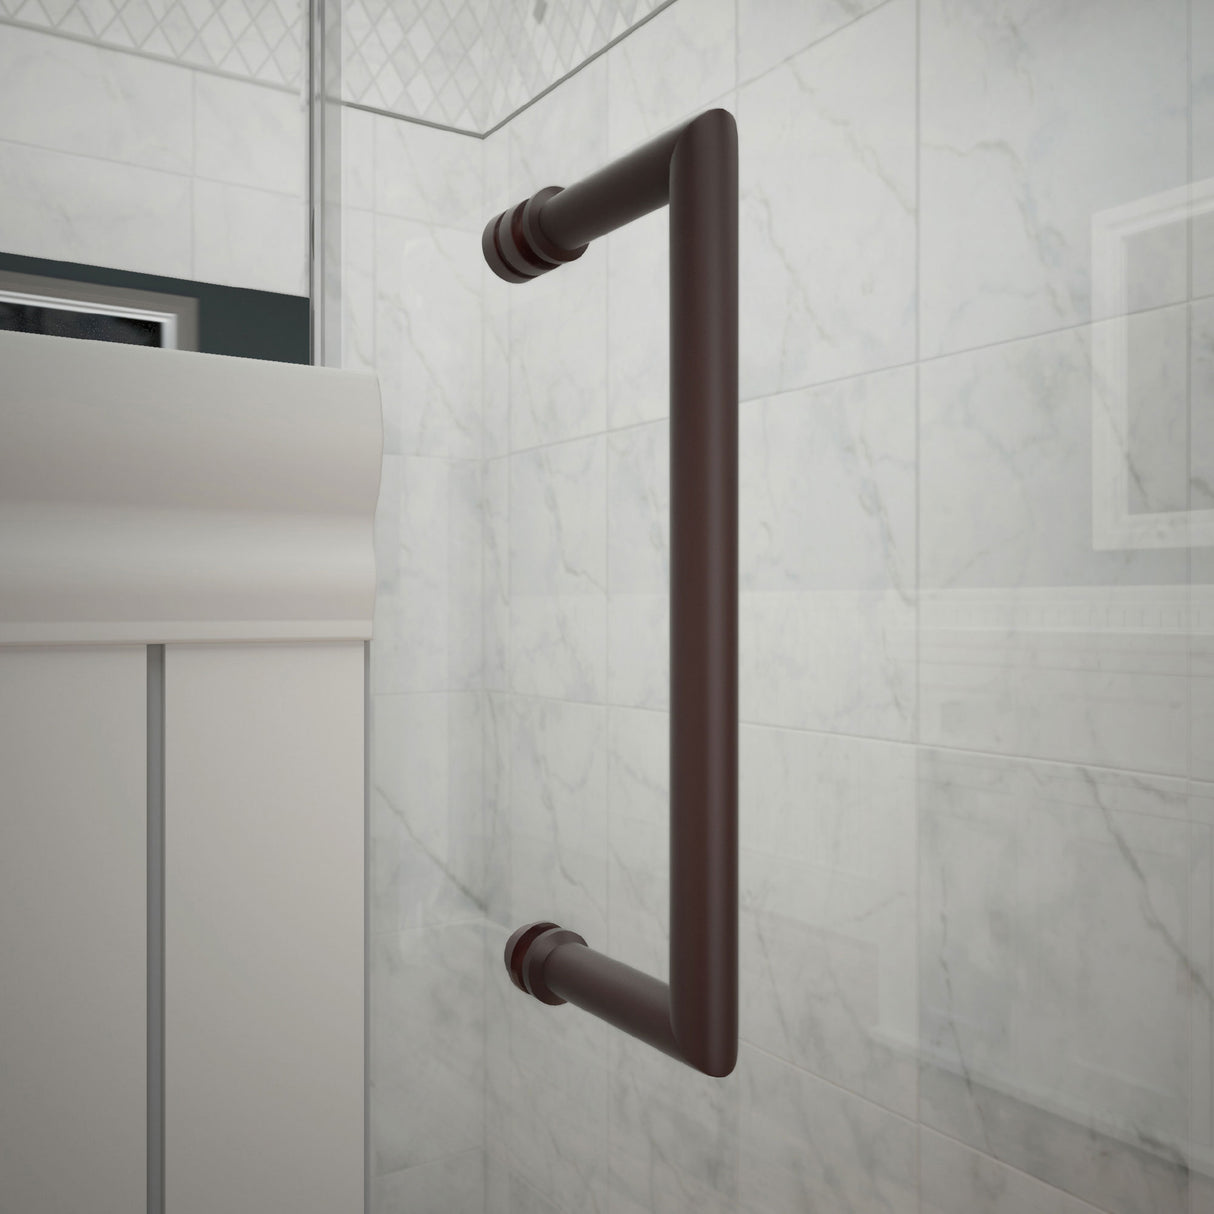 DreamLine Unidoor Plus 51 in. W x 34 3/8 in. D x 72 in. H Frameless Hinged Shower Enclosure in Oil Rubbed Bronze